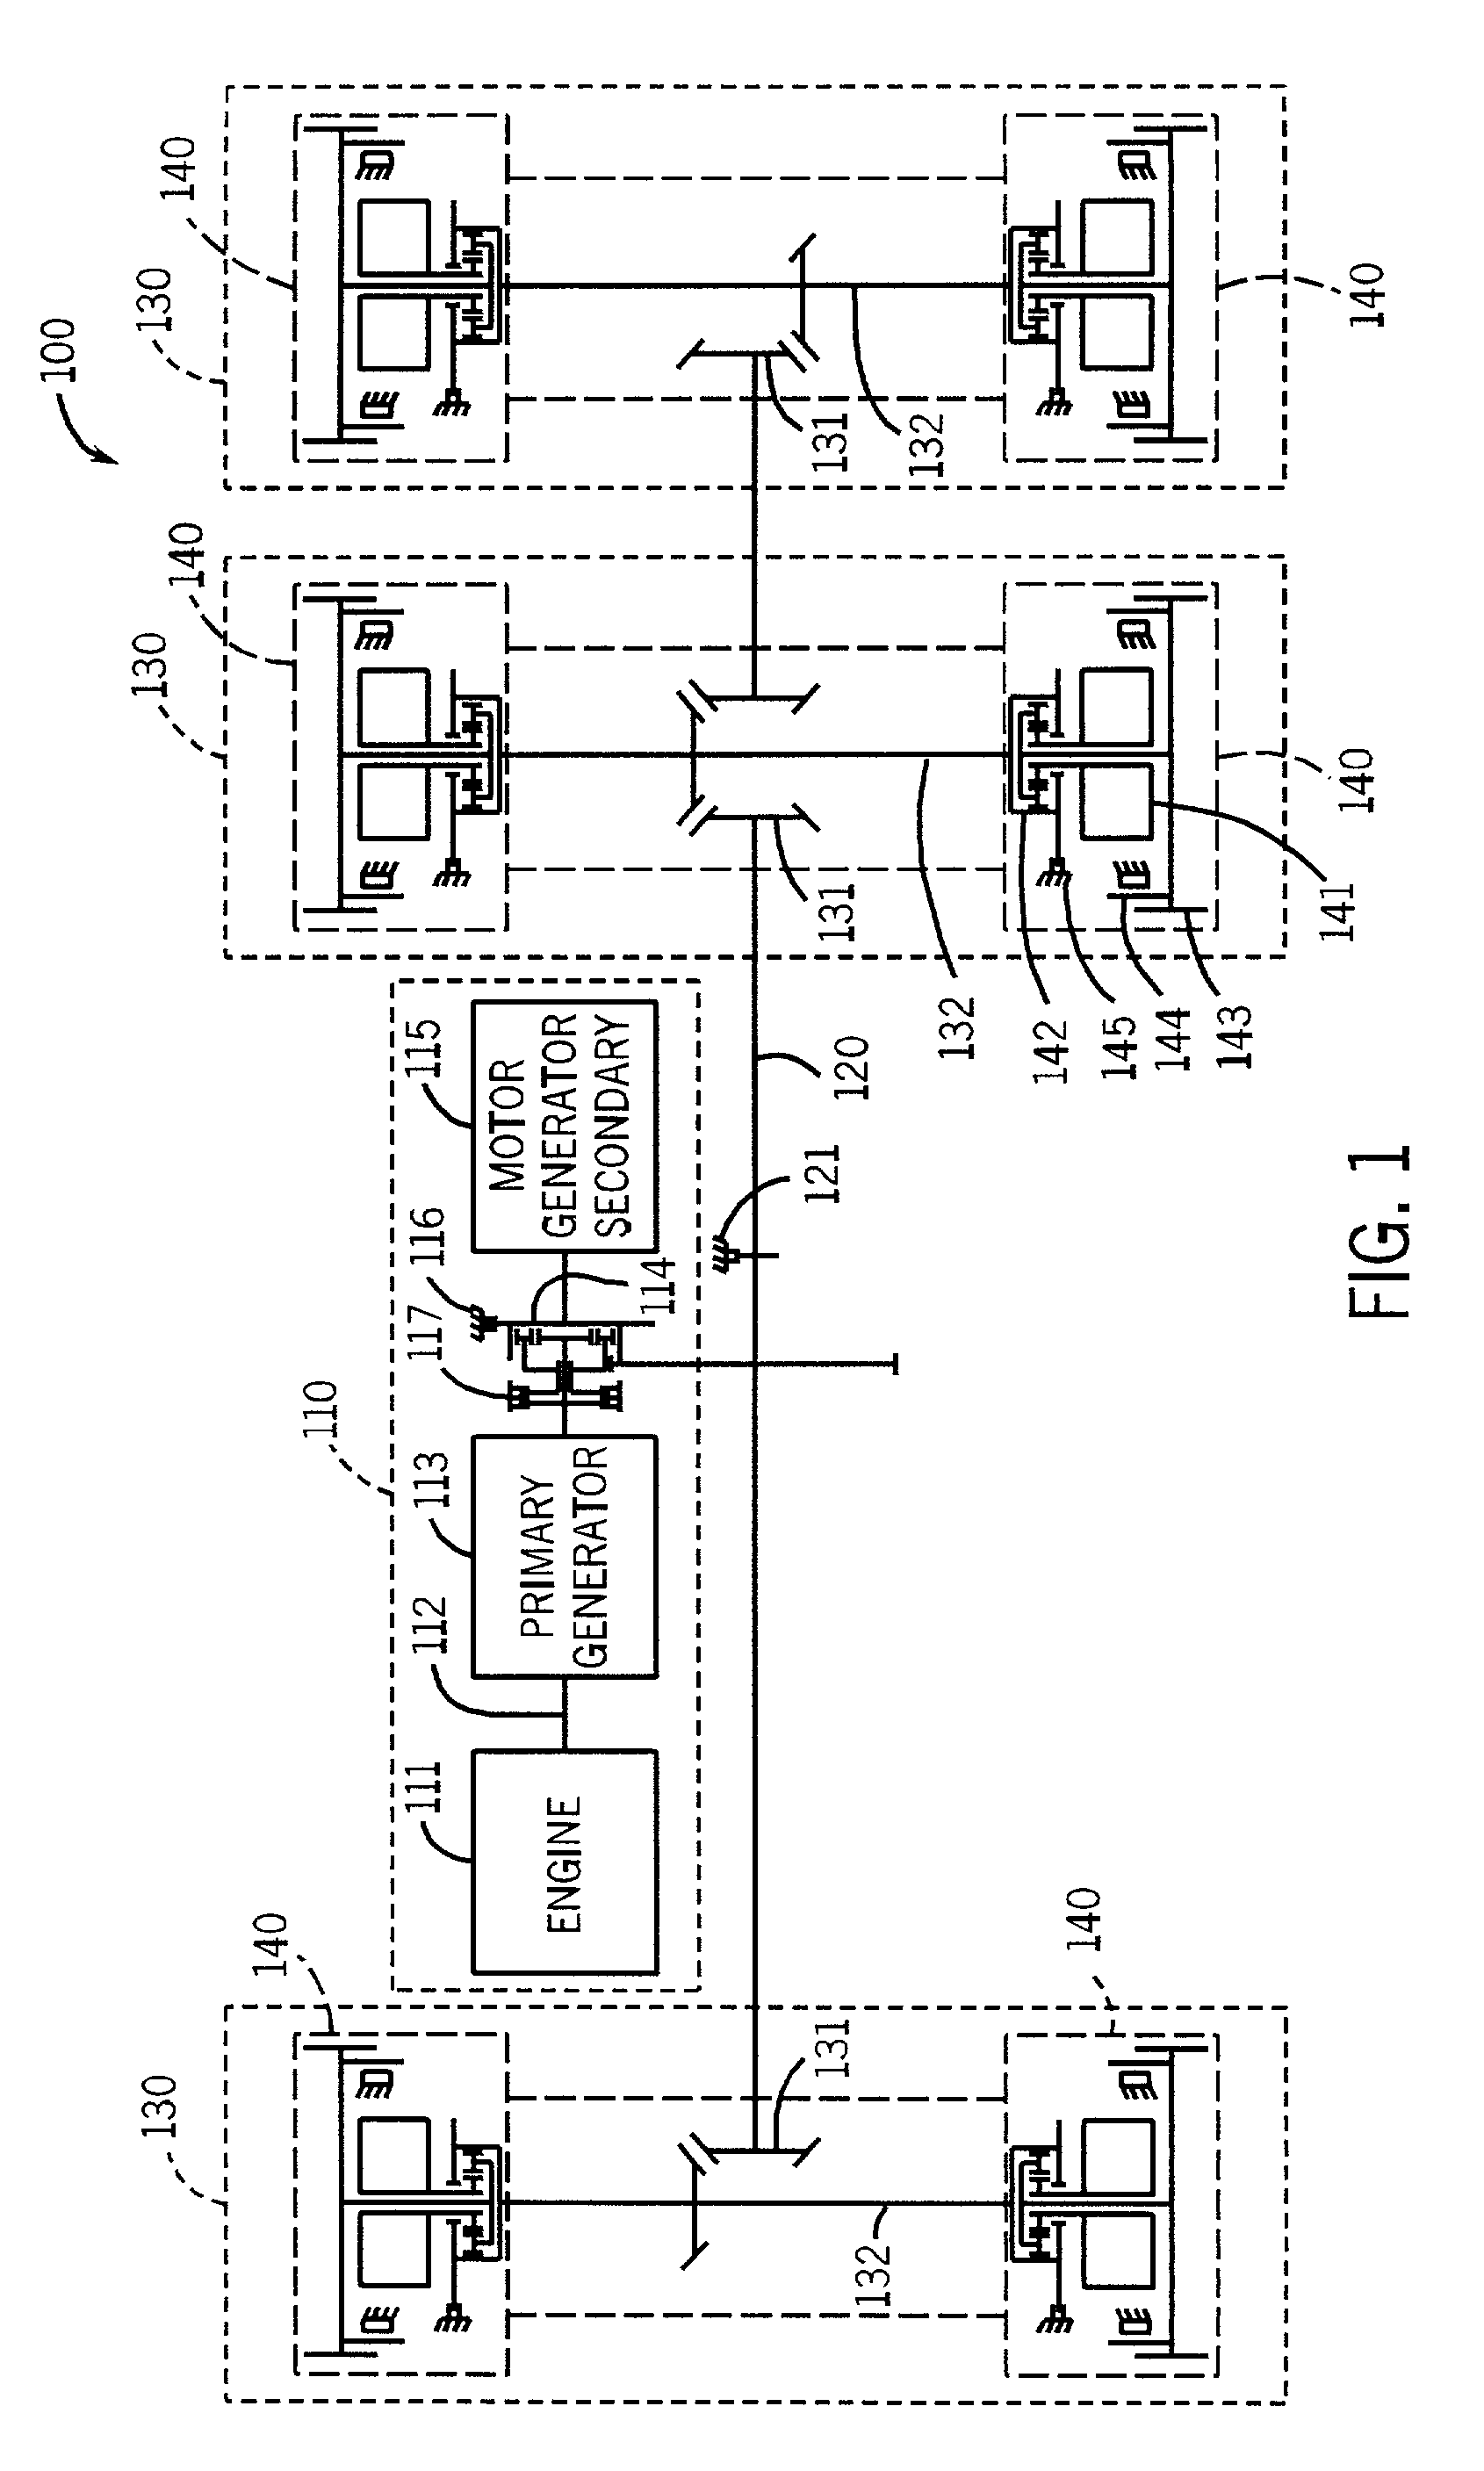 Hybrid vehicle with combustion engine/electric motor drive